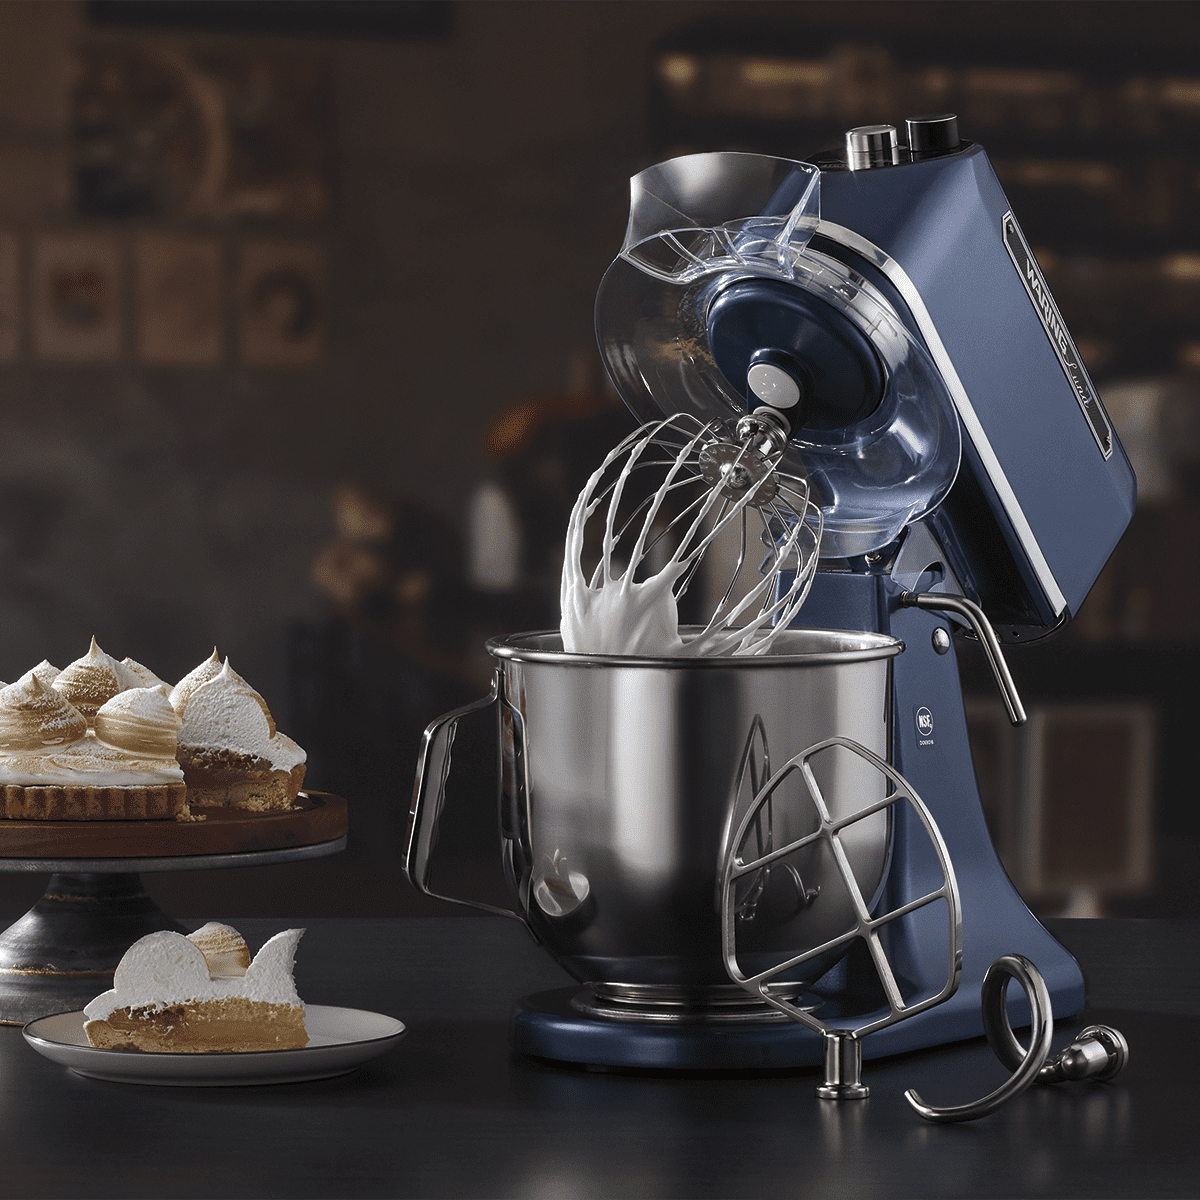 Waring 11 Speed 7 Qt. Stand Mixer